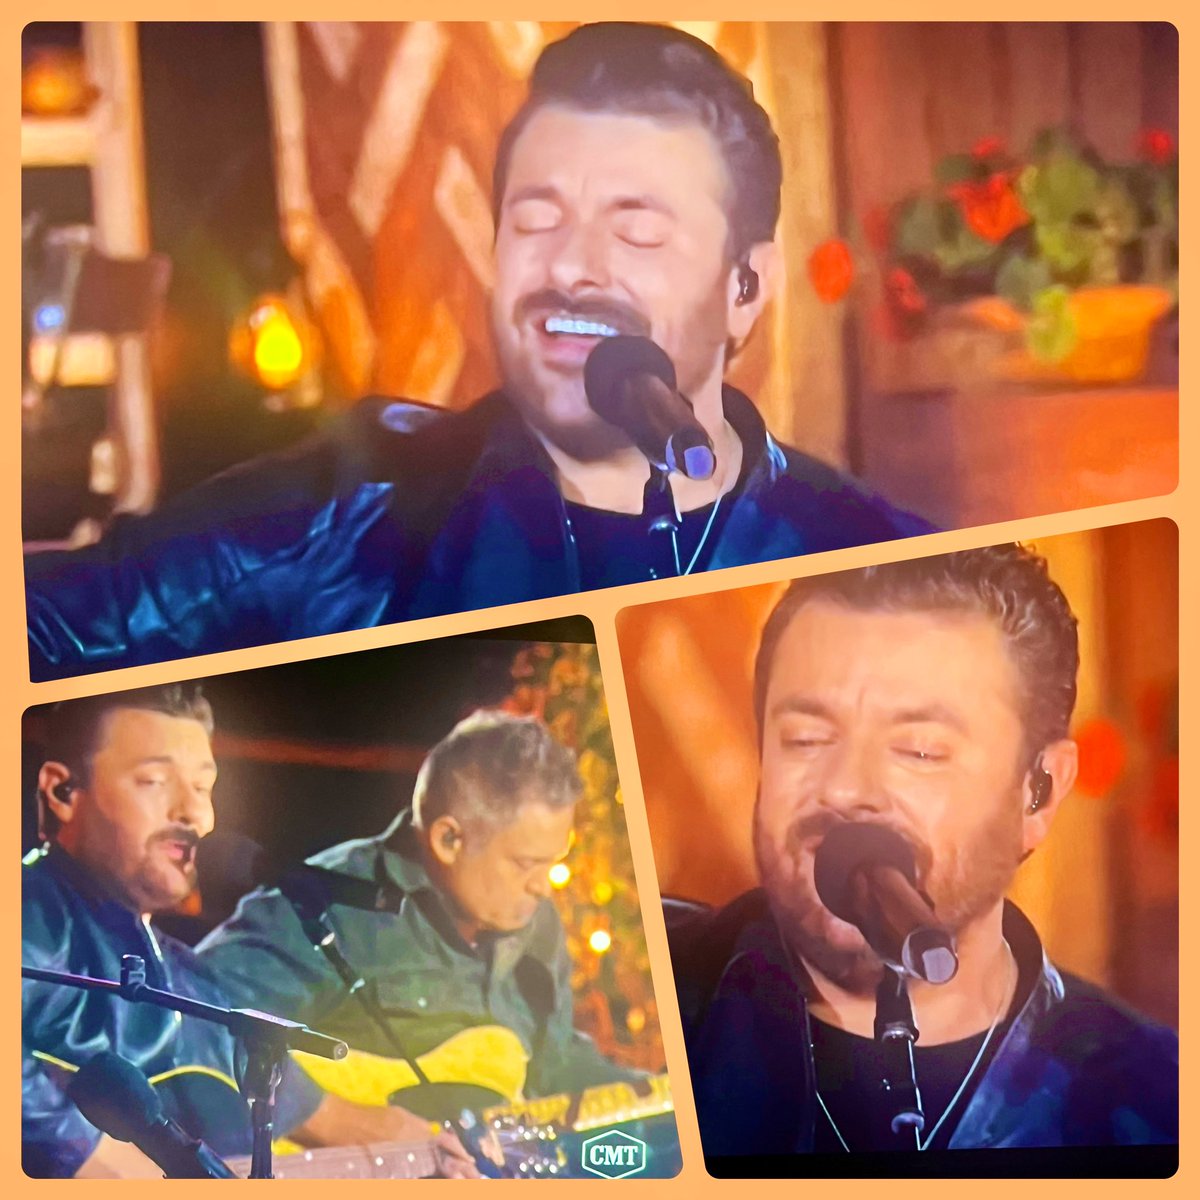 @ChrisYoungMusic @CMT You, @m10penny & Chris DeStefano are so talented🎼thoroughly adored each second of y’all’s #CMTCampfireSessions performance🥹How do u sustain long notes so smoothly, CY?🔥That enchanting voice of yours never wavers in greatness, versatility & power💪🏻always amazing❤️‍🔥I love u, CY😘